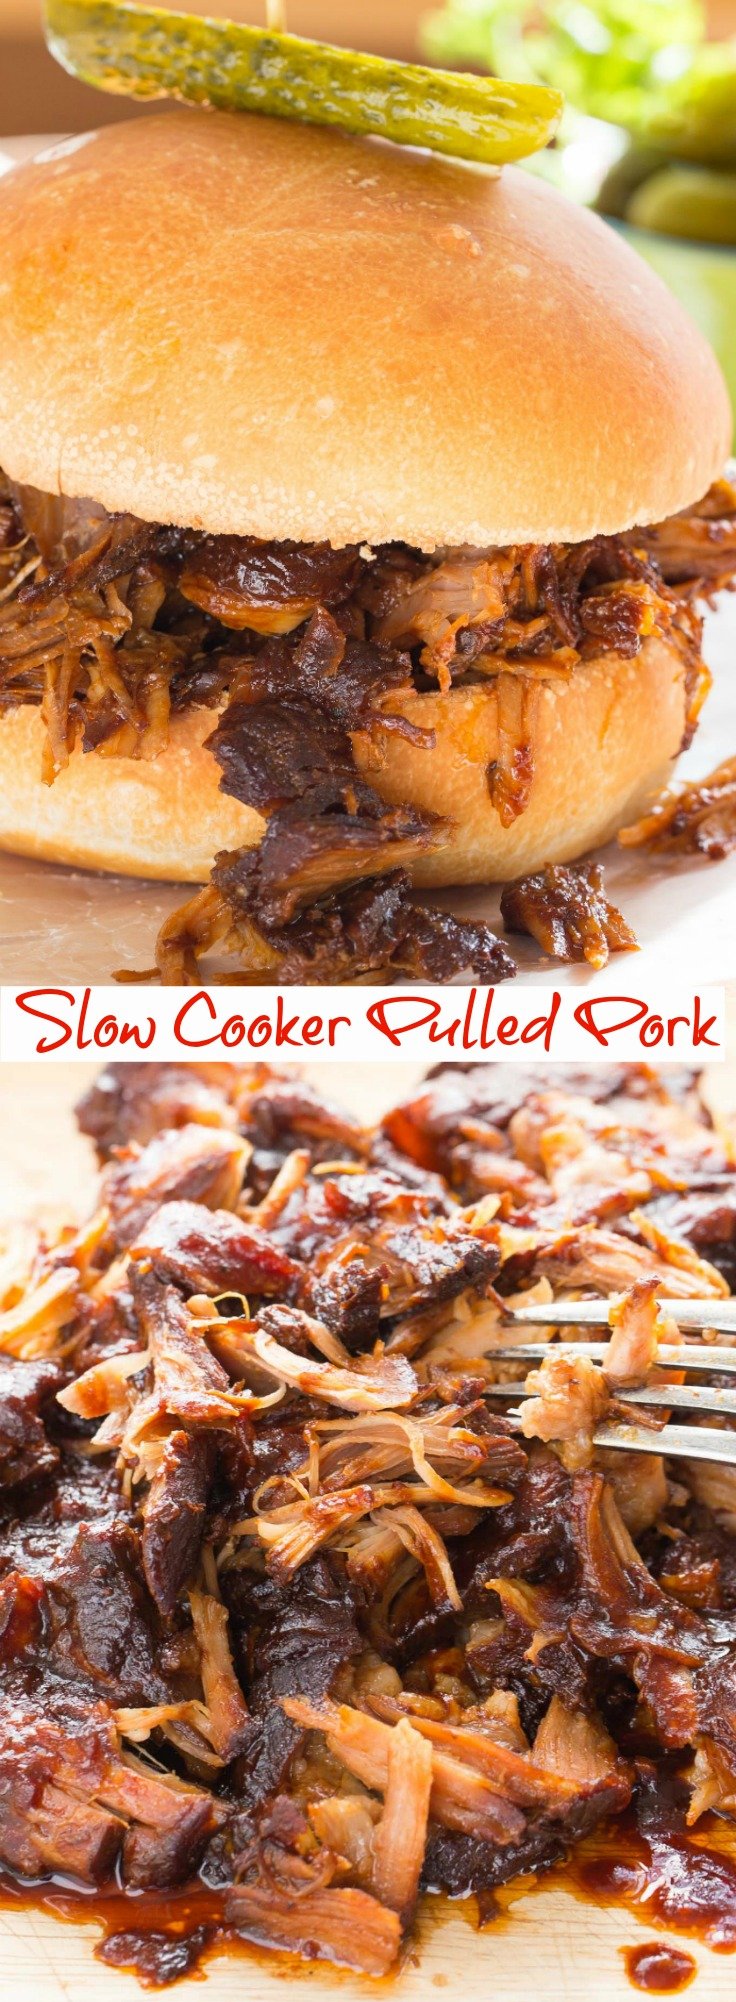 A Slow Cooker Pulled Pork recipe that makes amazing, fork tender pork! slow cooked to perfection in homemade Jack Daniel's BBQ sauce. via @artandthekitch